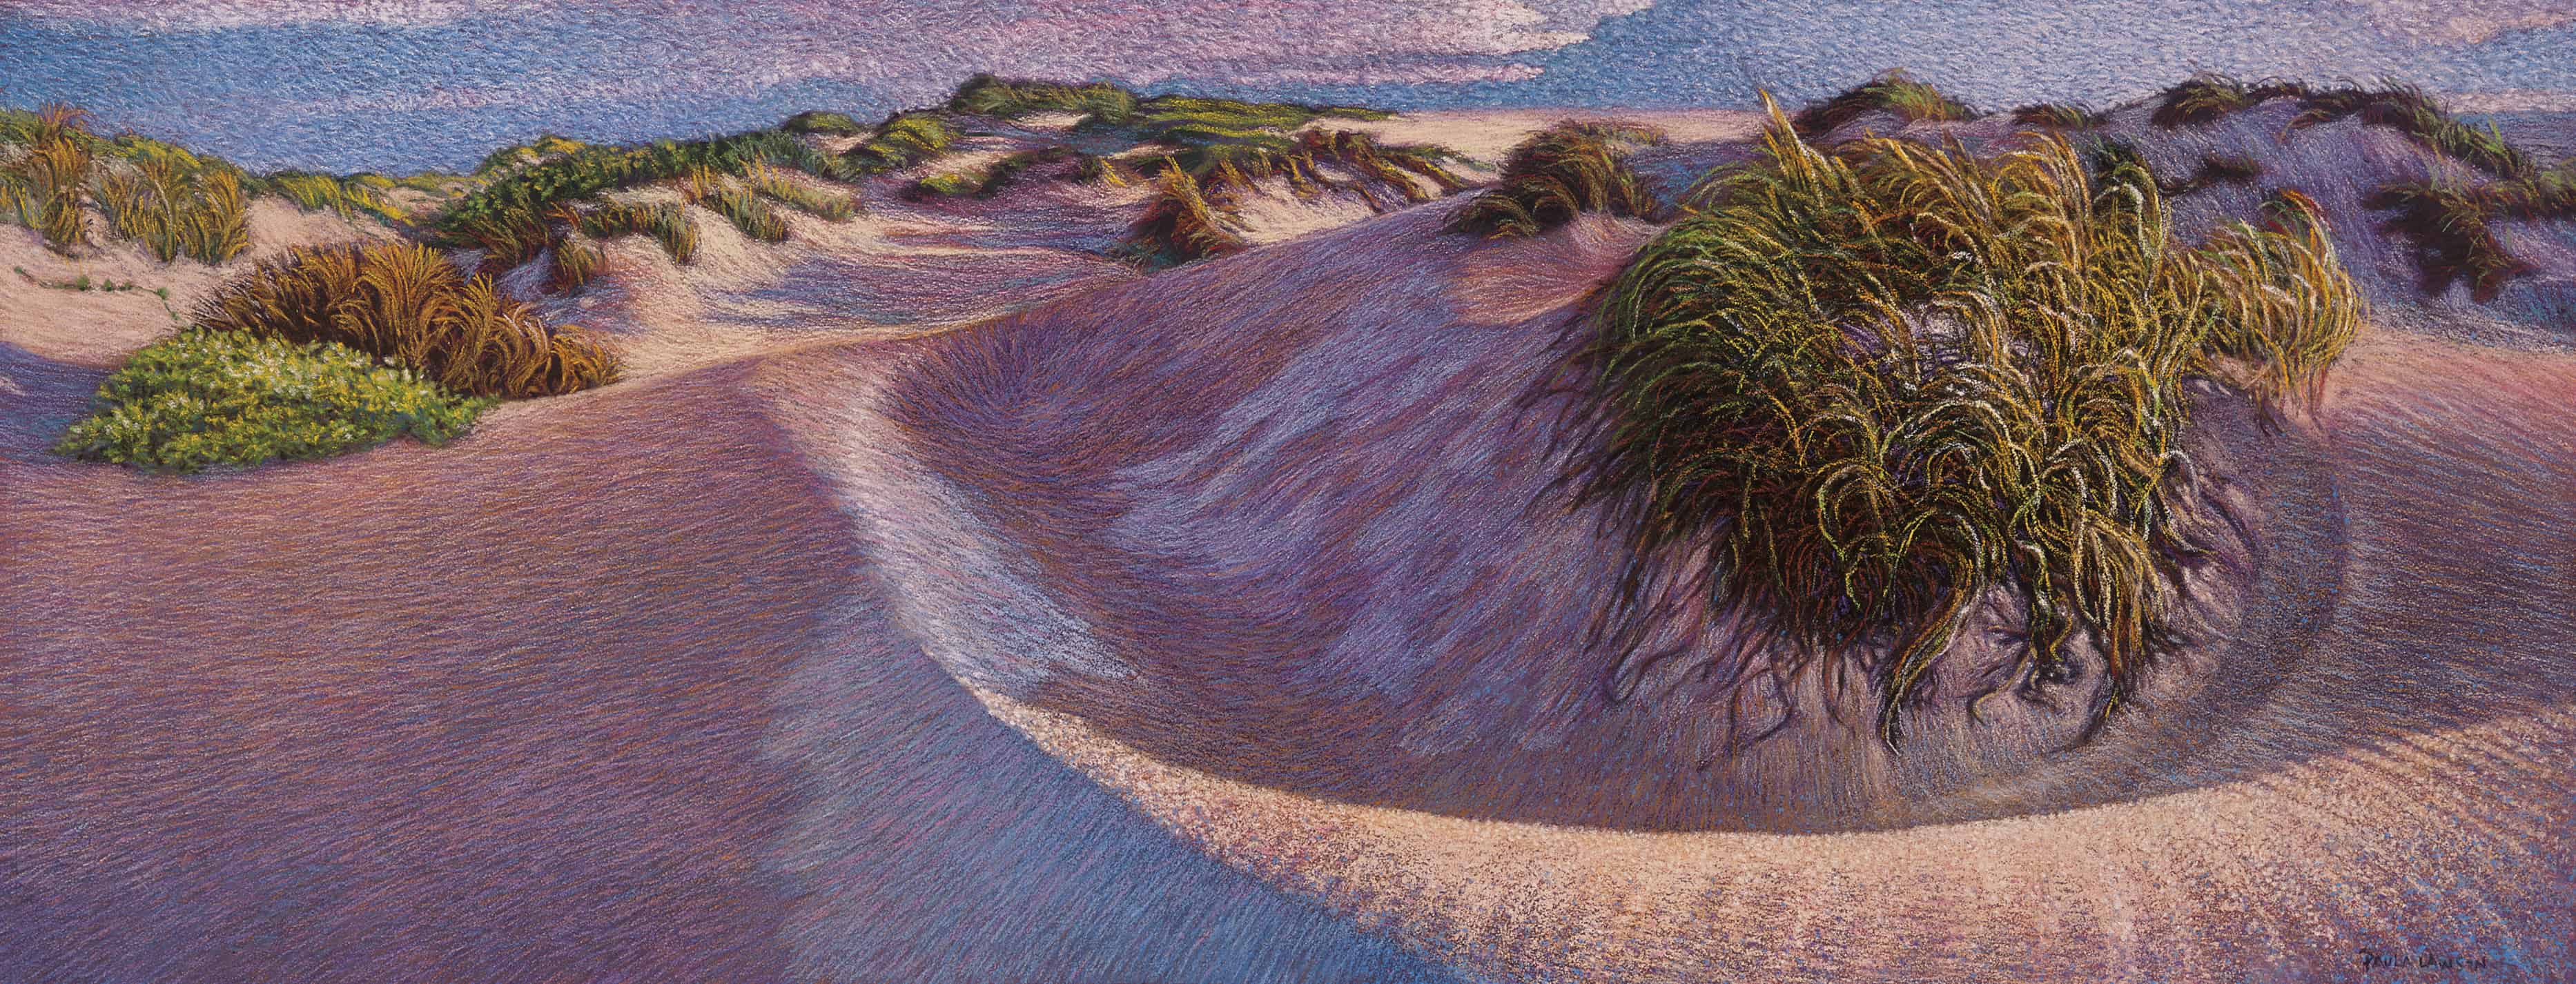 First Light on the Dunes